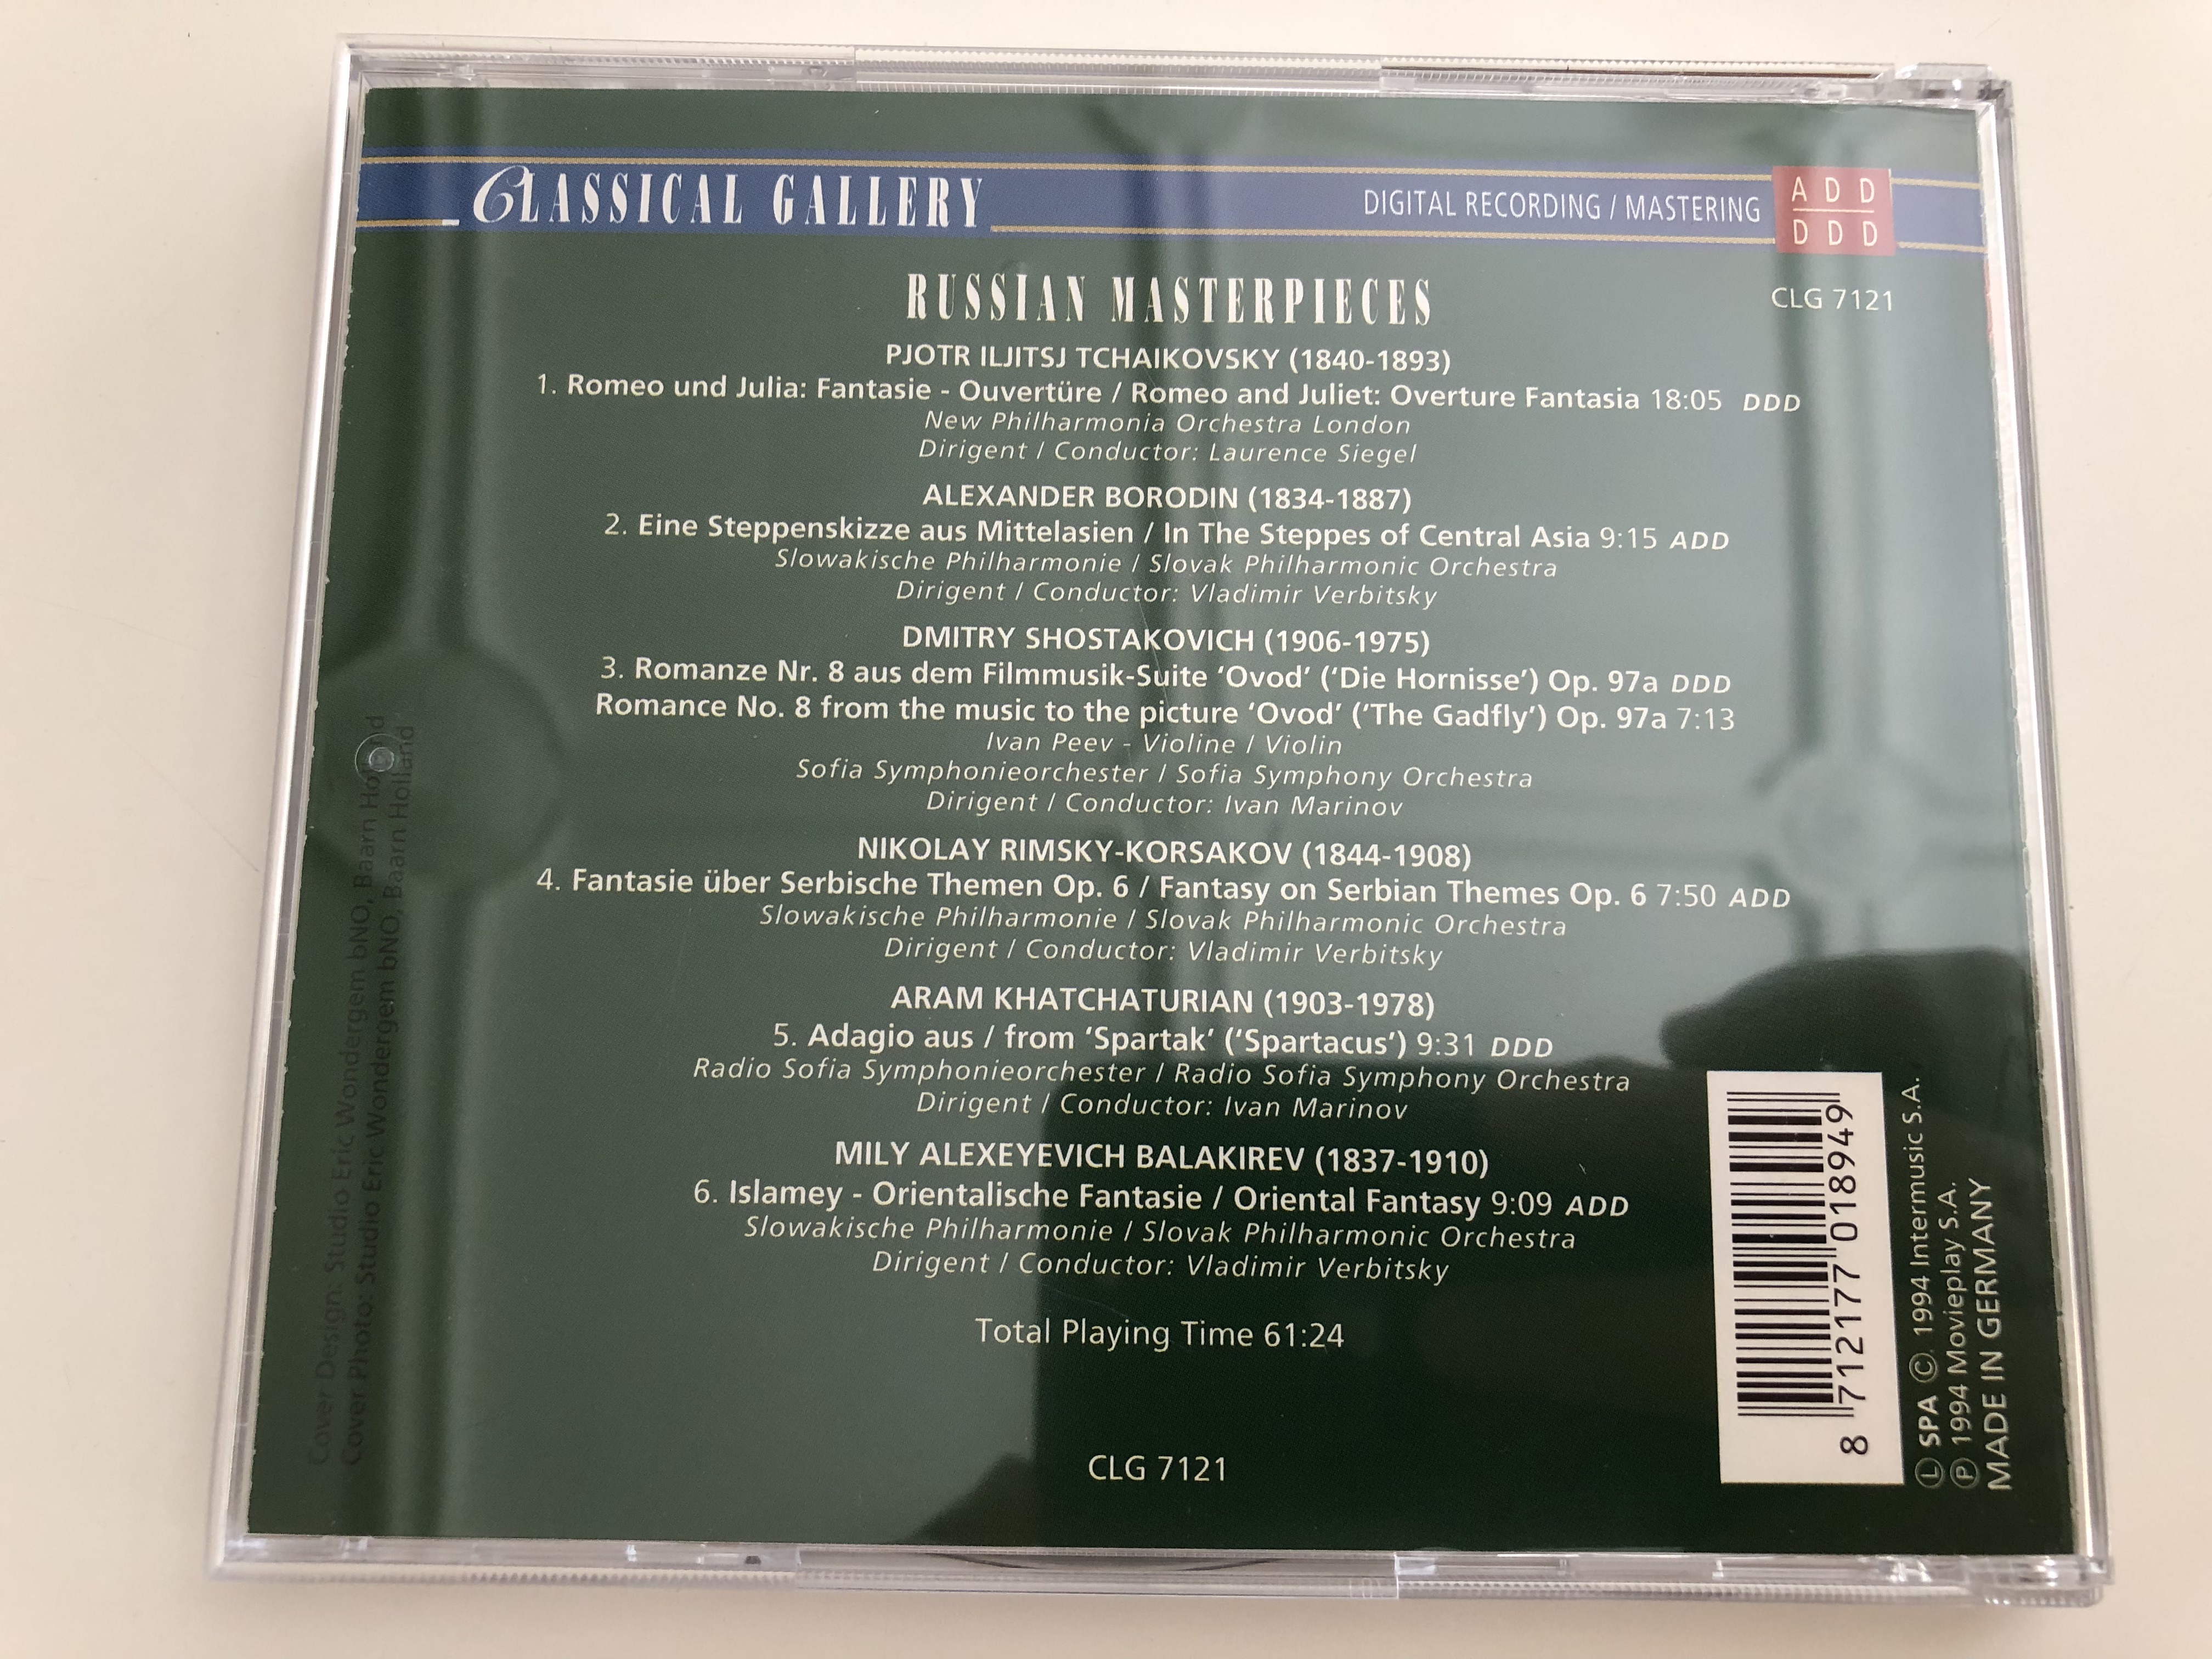 -russian-masterpieces-tchaikovsky-romeo-and-juliet-borodin-in-the-steppes-of-central-asia-shostakovich-the-gadfly-rimsky-korsakov-fantasy-on-serbian-themes-classical-gallery-clg-7121-audio-cd-1994-5-.jpg